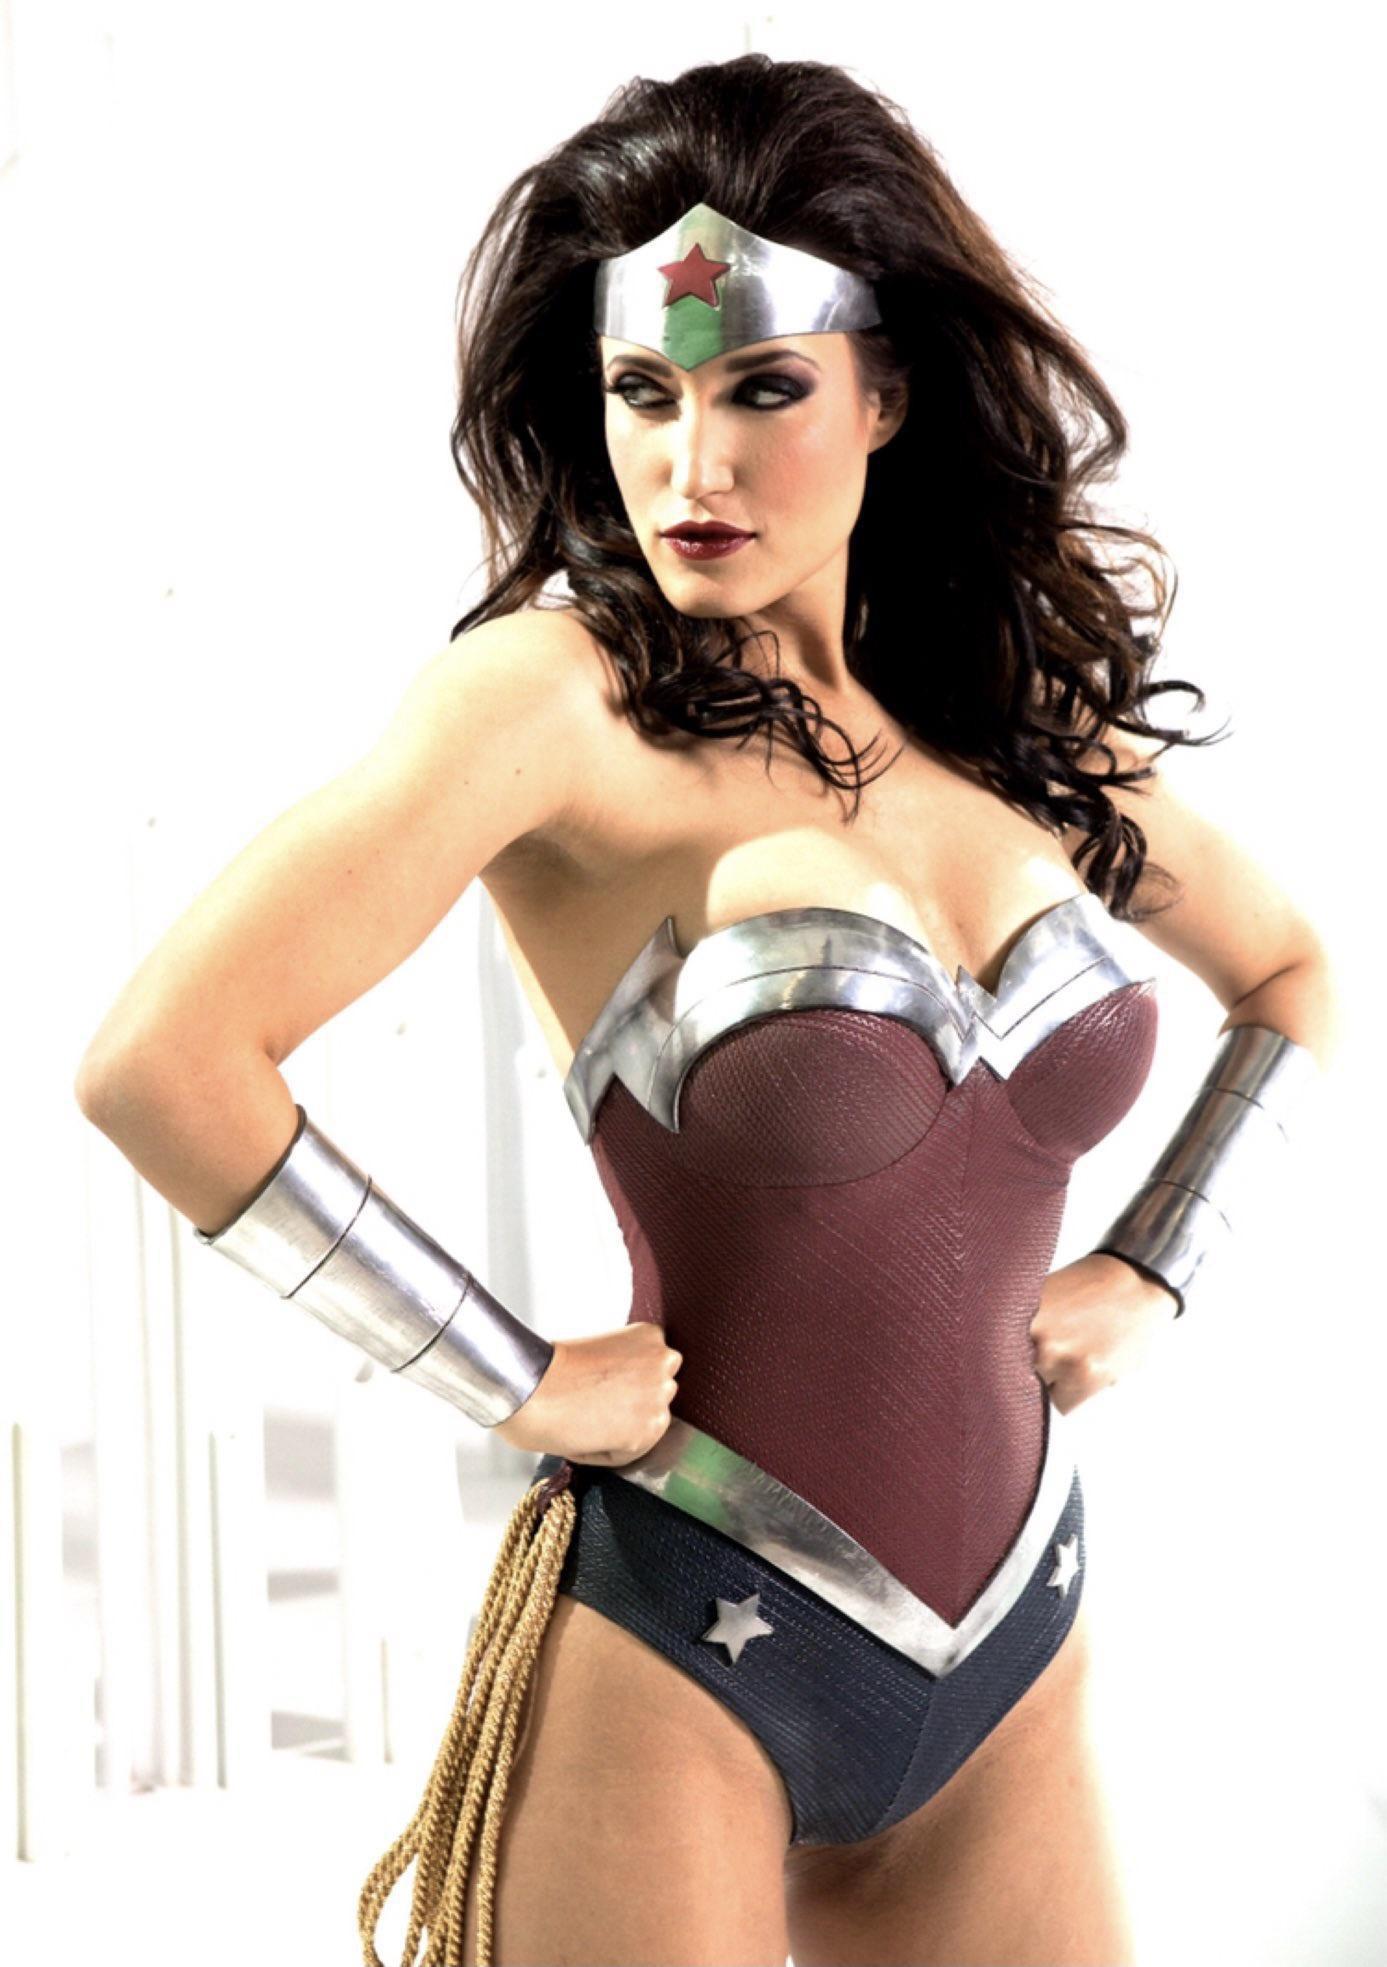 View Wonder Woman by Kimberly Kane for free | Simply-Cosplay